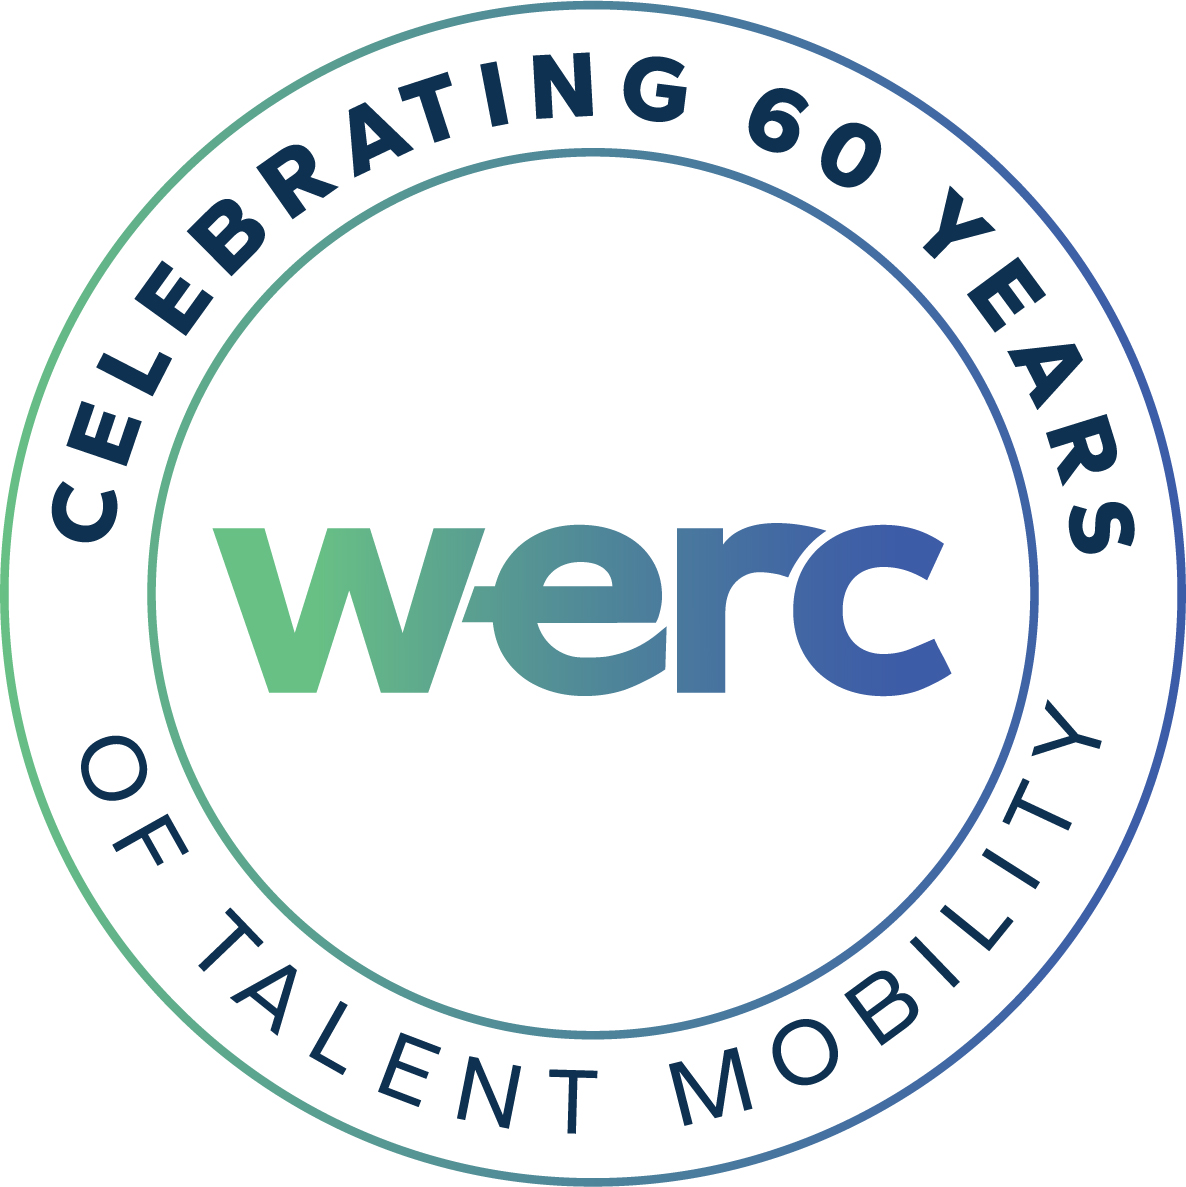 Celebrating 60 Years of Talent Mobility - WERC